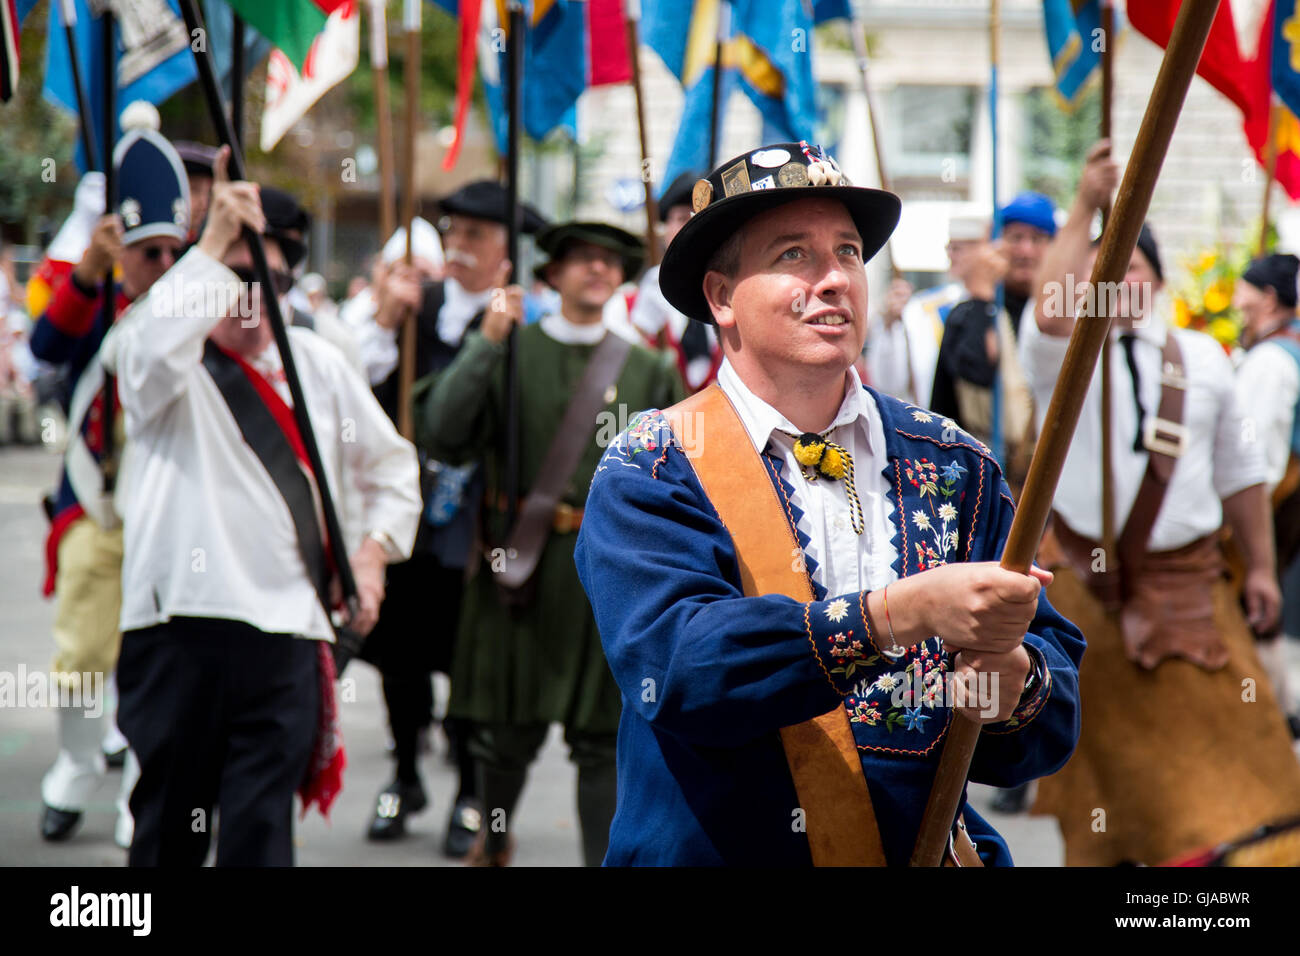 Zurich, Switzland. Flag bearers wear traditional dress at a ceremony in Zurich in celebration of Swiss National Day. Stock Photo